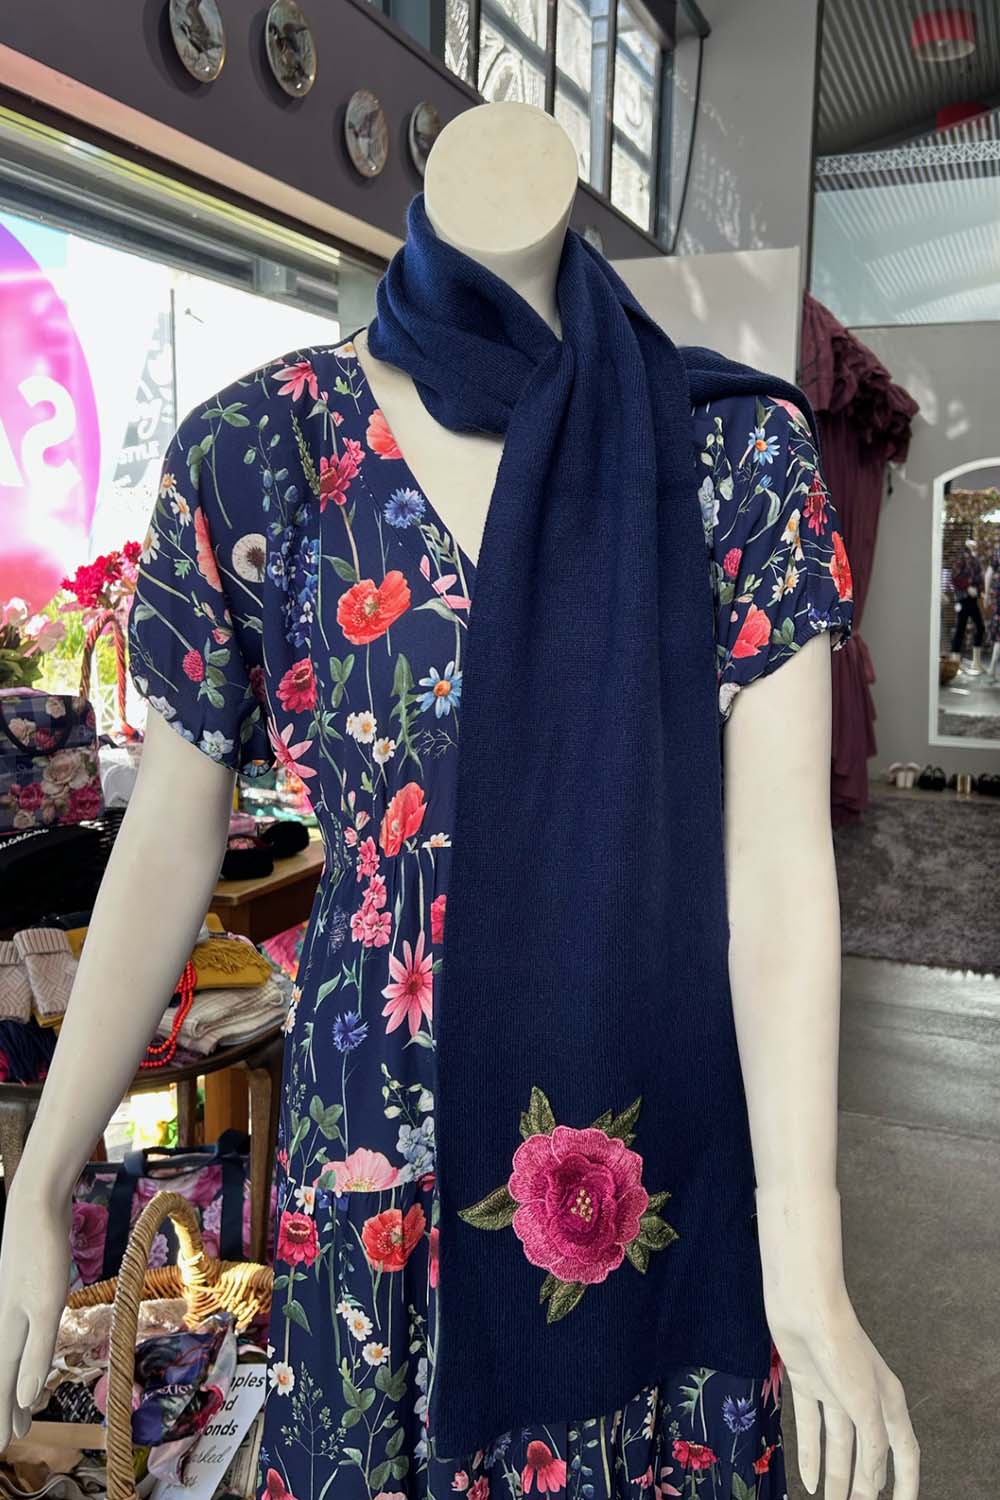 The Annah Stretton Freya Cashmere Scarf hanging down on a mannequin